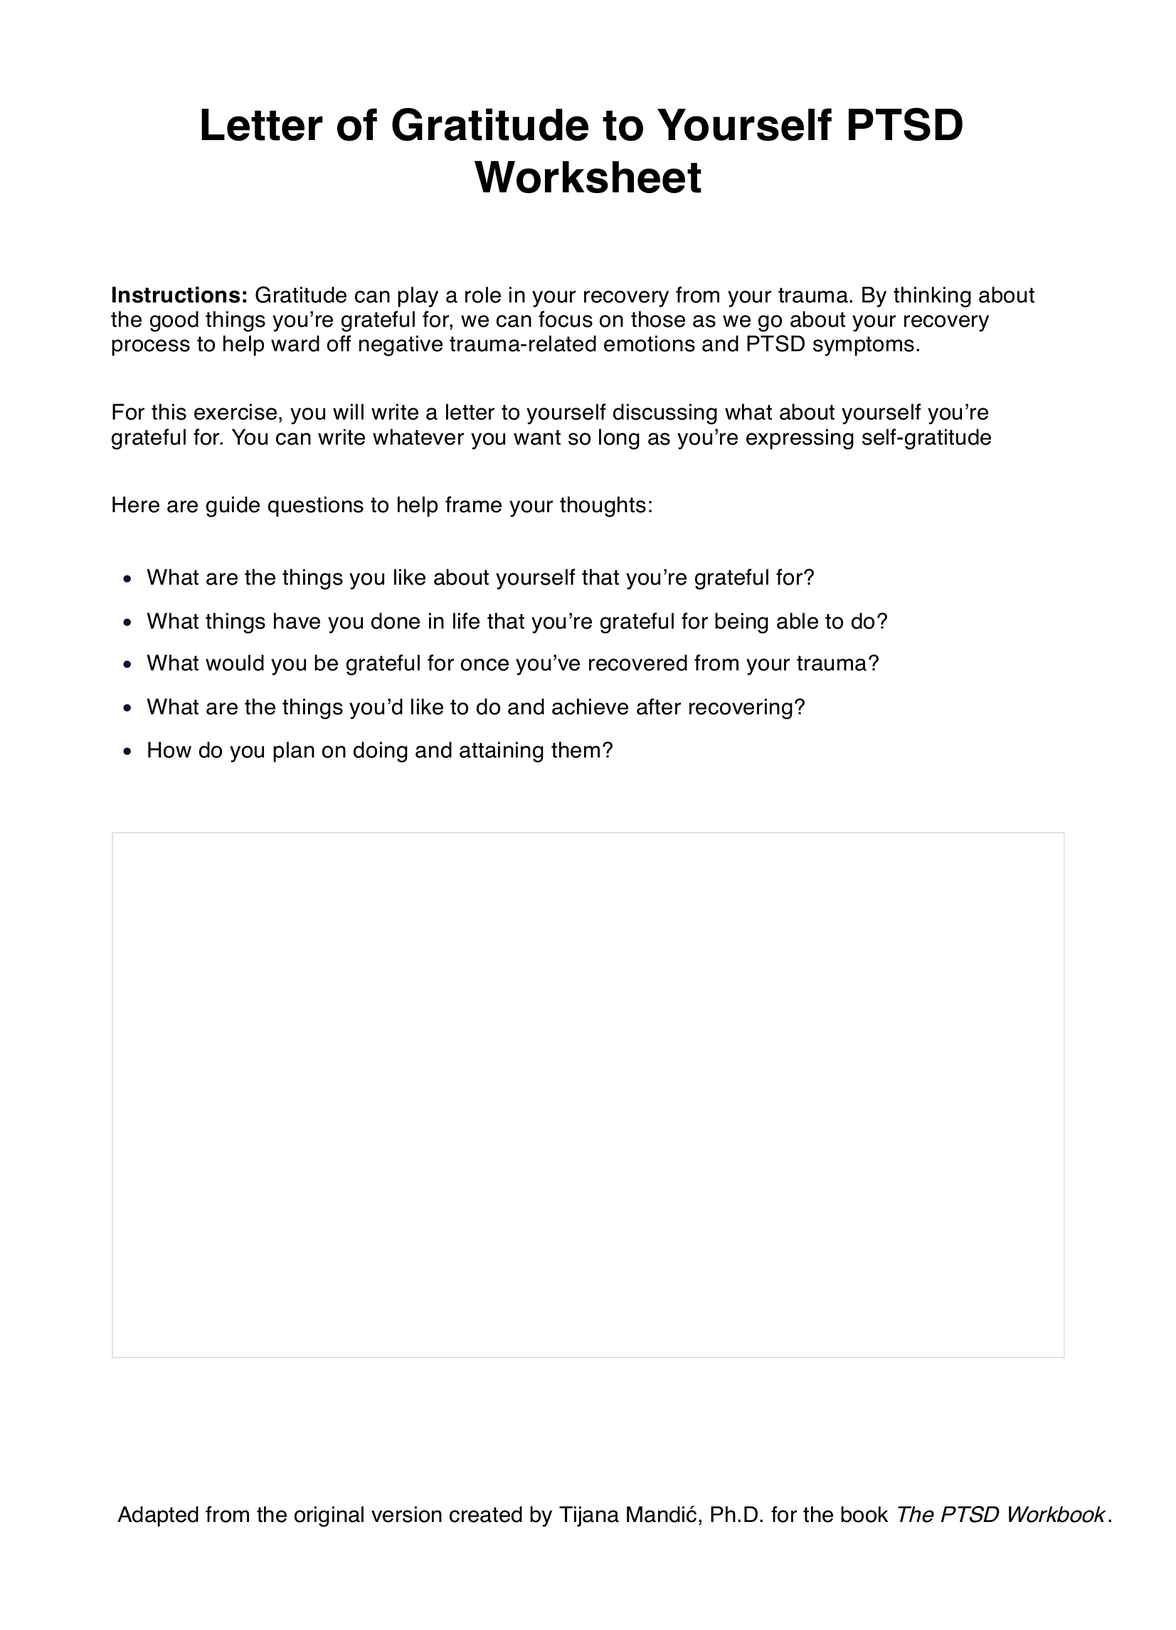 Letter of Gratitude to Yourself PTSD Worksheet PDF Example